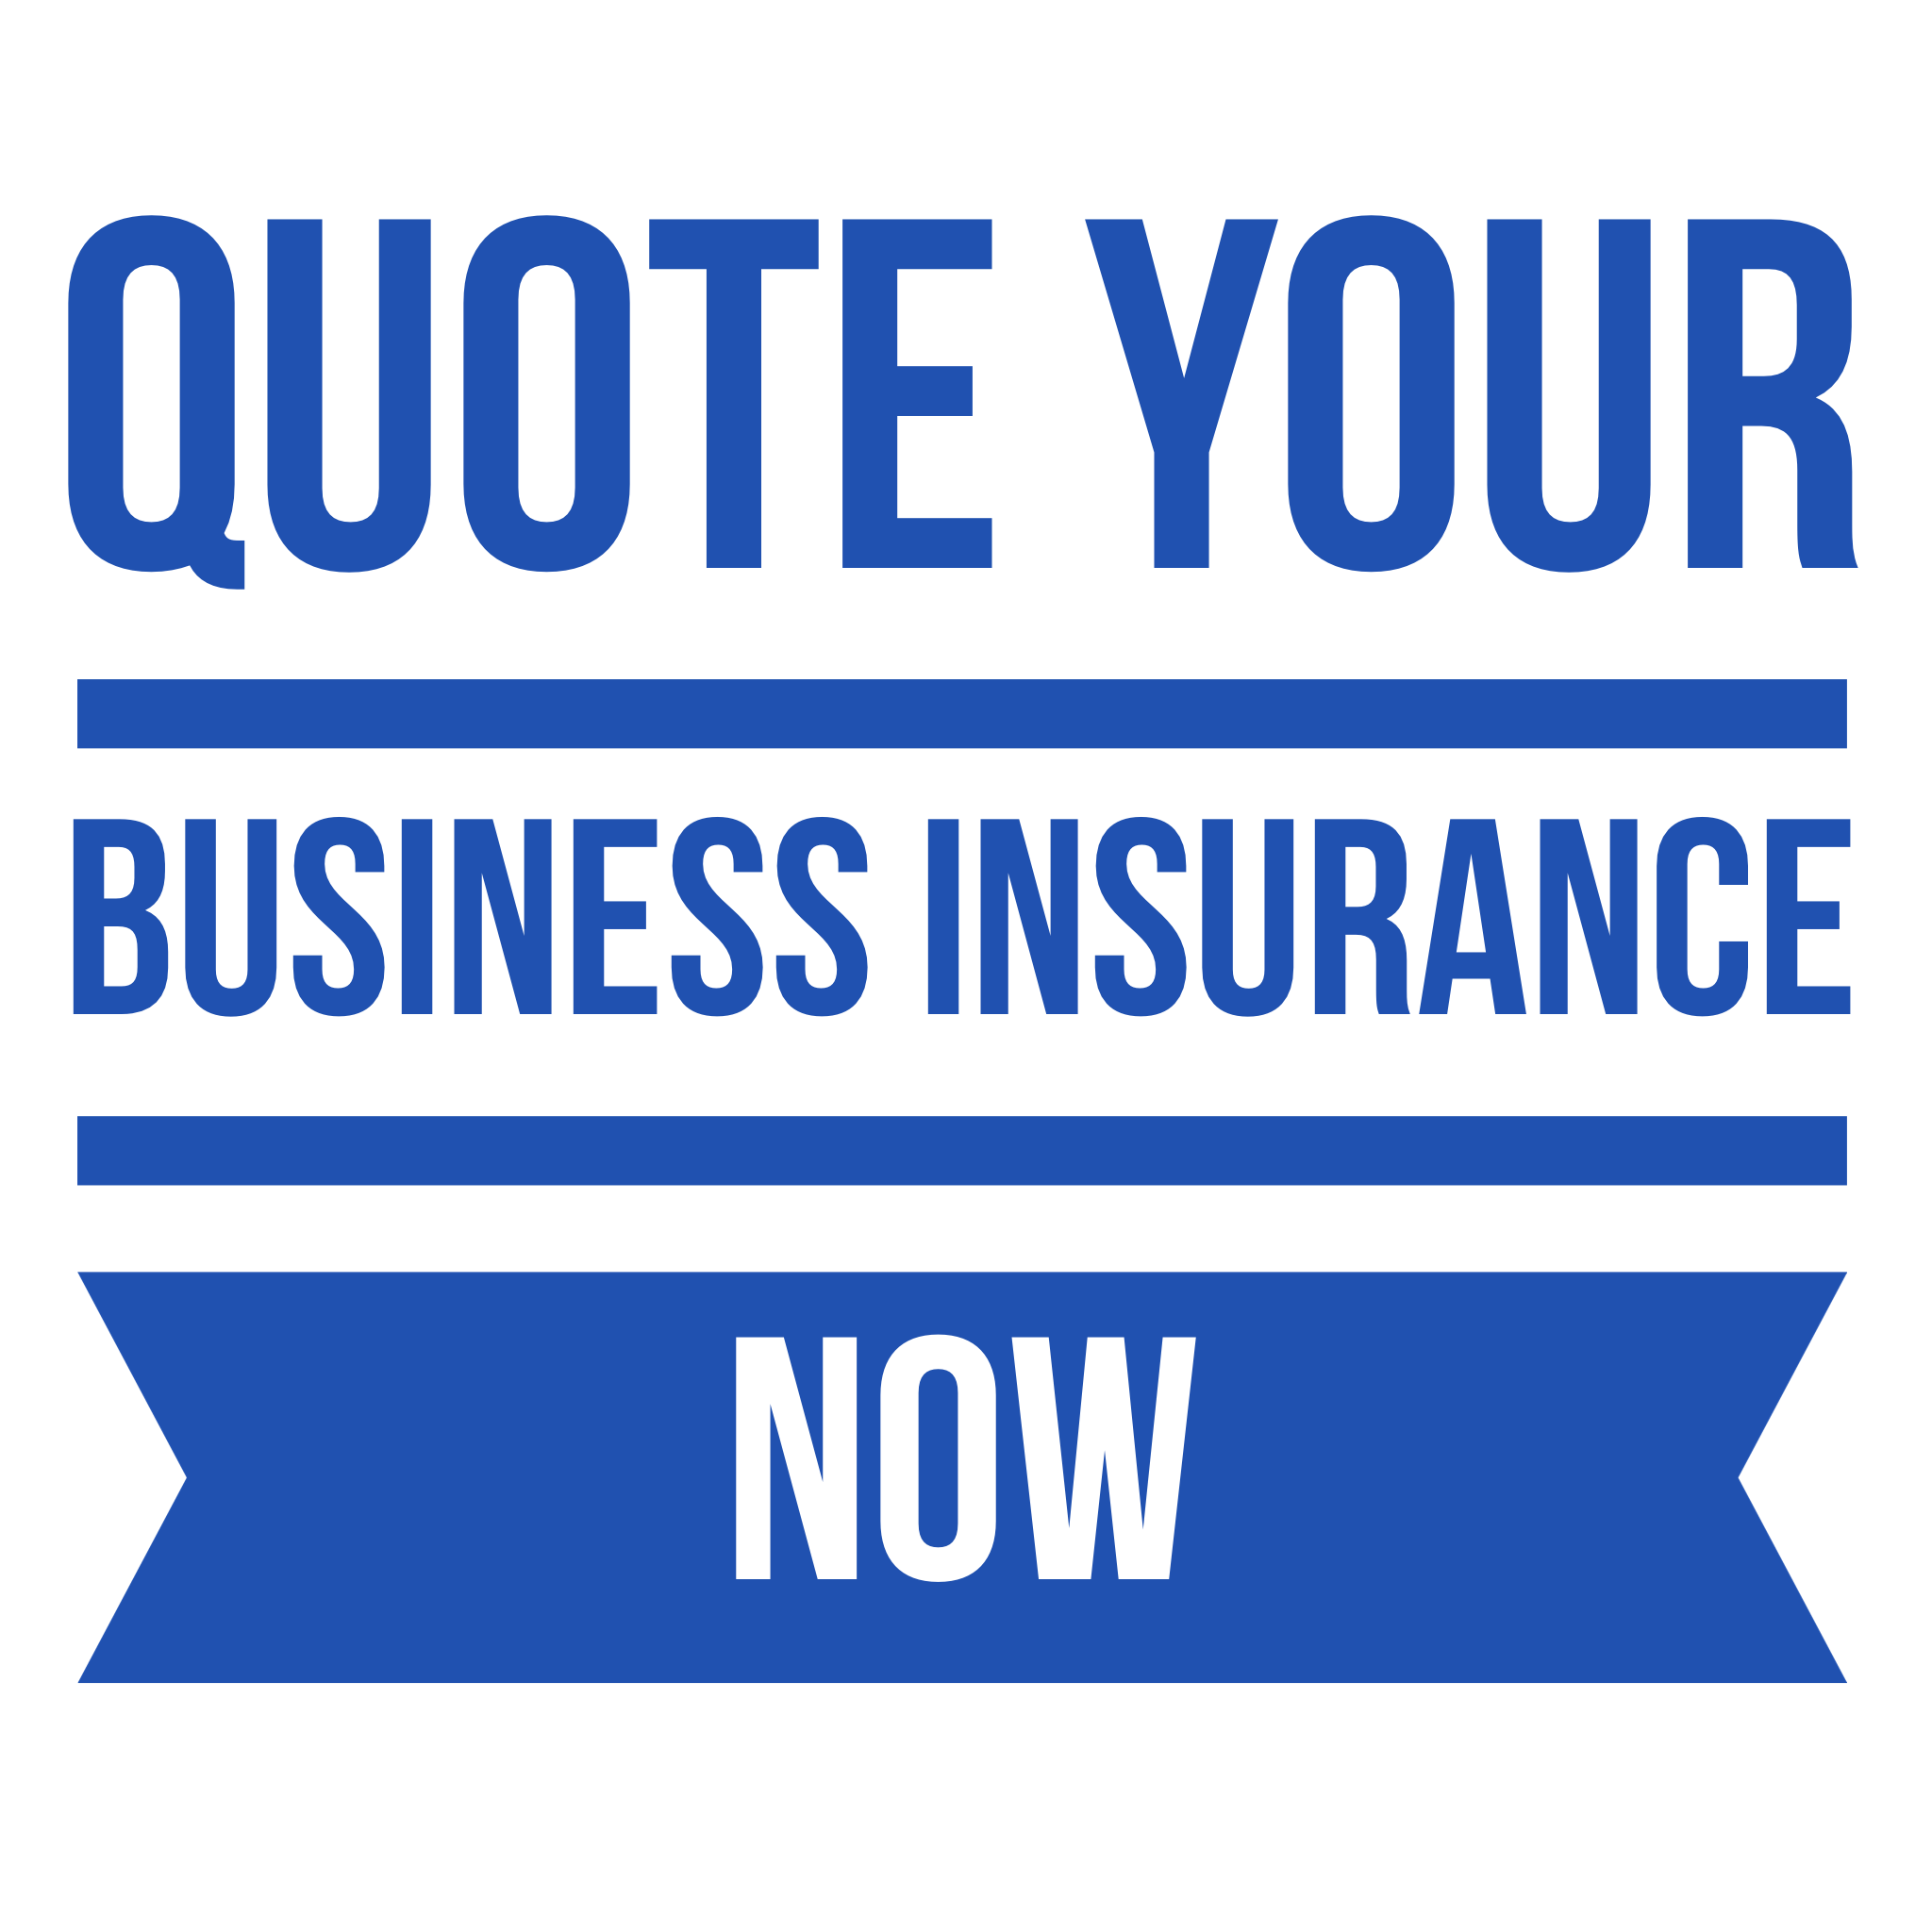 Get Quote for Business Insurance